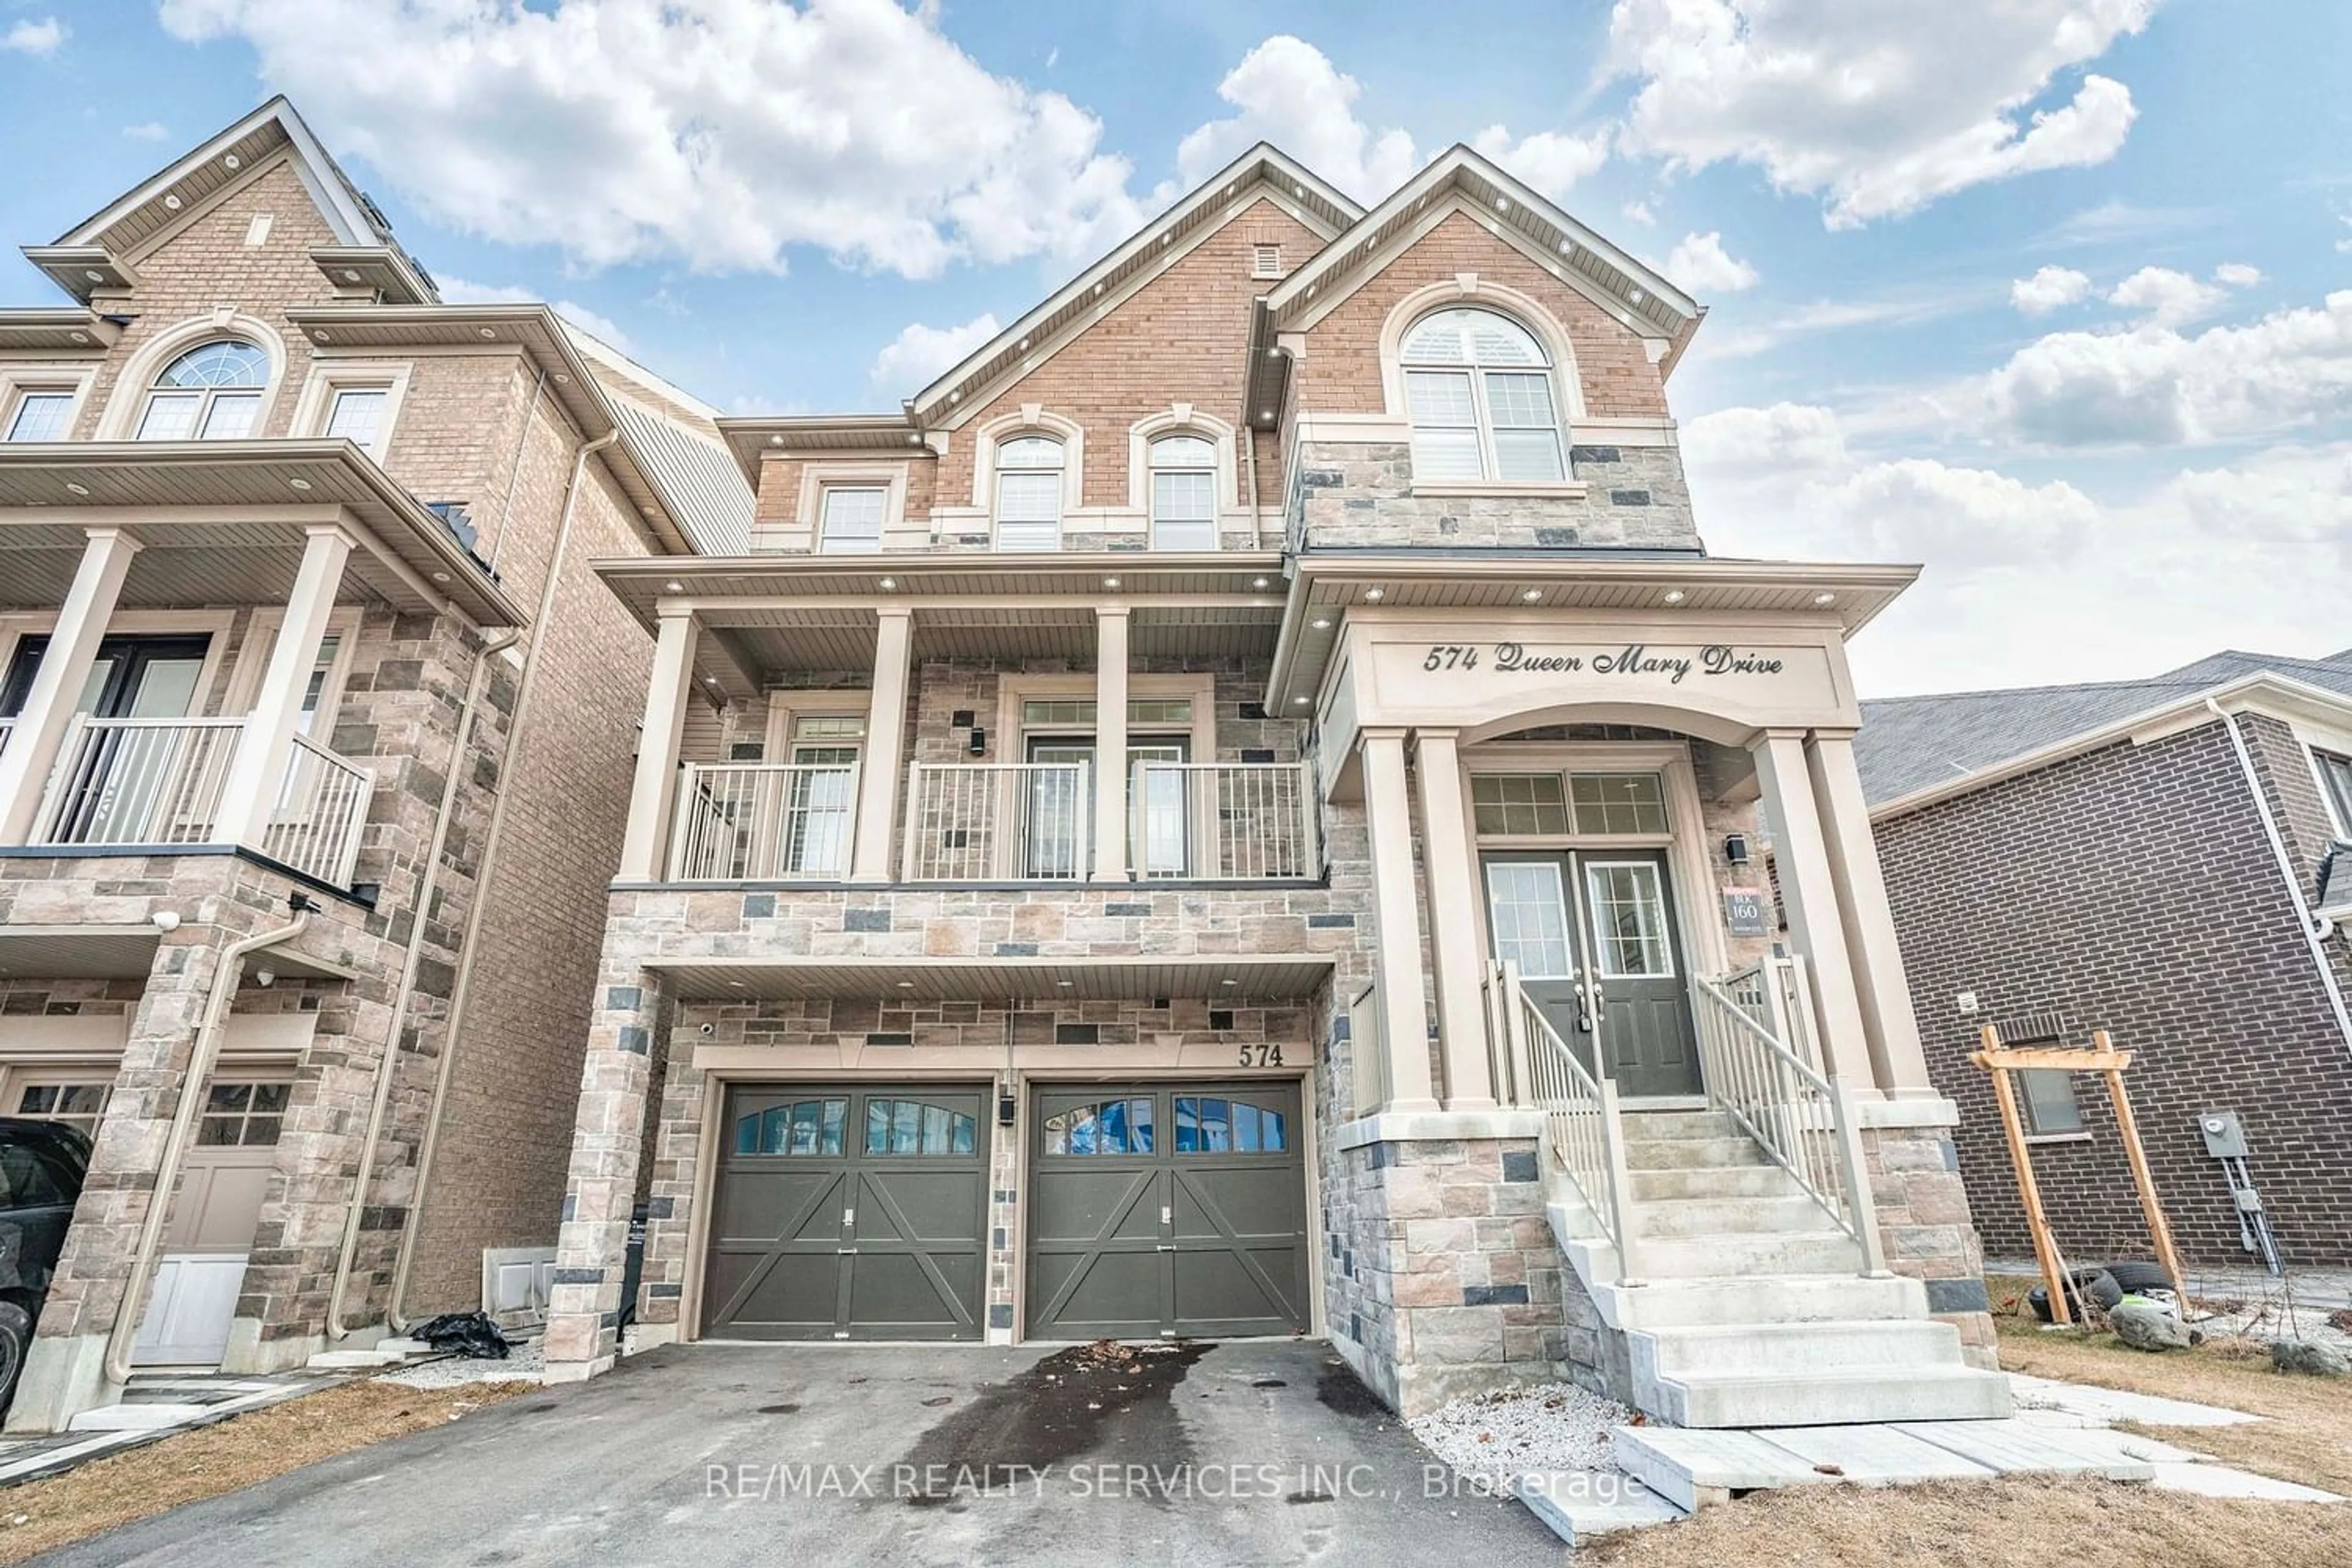 Home with brick exterior material for 574 Queen Mary Dr, Brampton Ontario L7A 4Y6